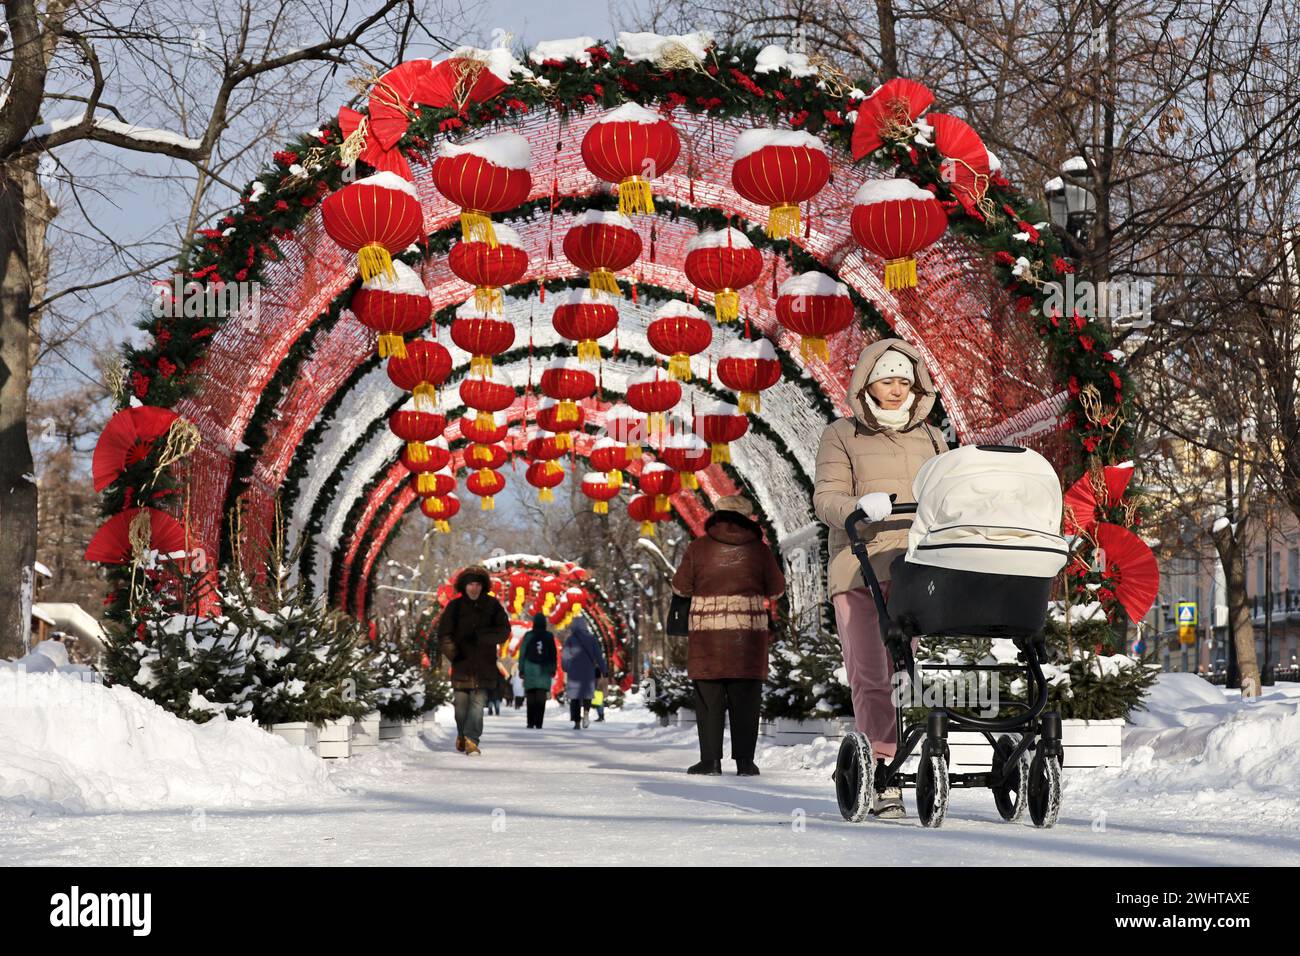 People walking on background of Chinese New Year decorations, woman with pram in foreground. Festive alley decorated with red paper lanterns in winter Stock Photo